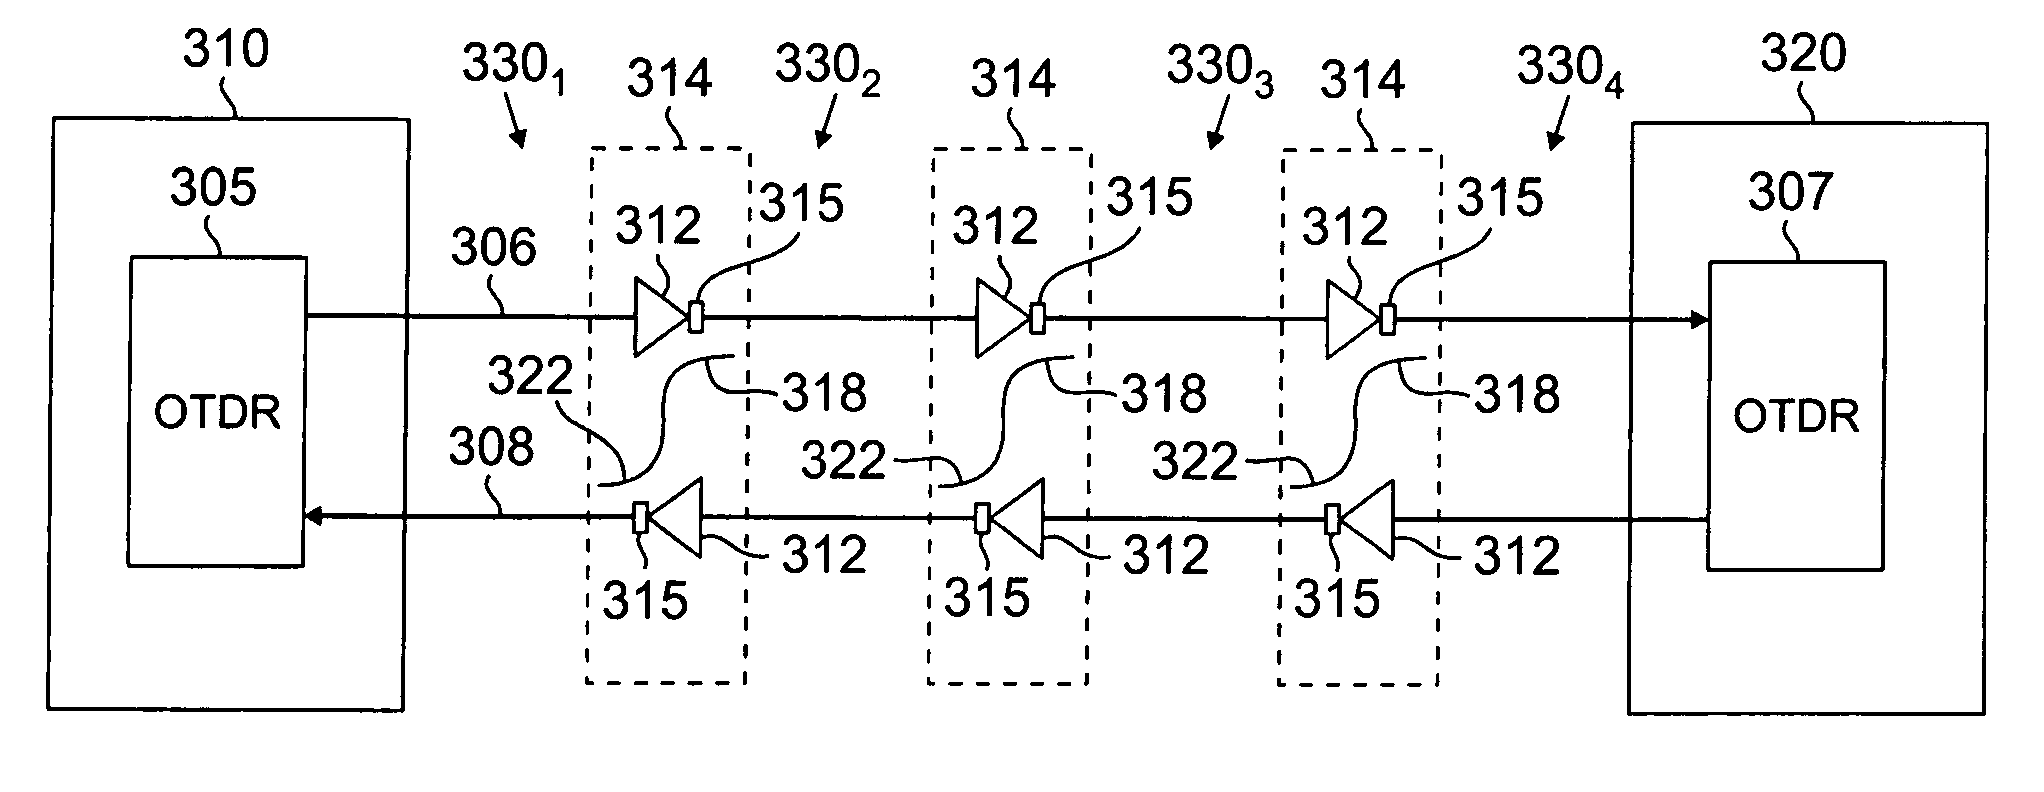 Cotdr arrangement with swept frequency pulse generator for an optical transmission system